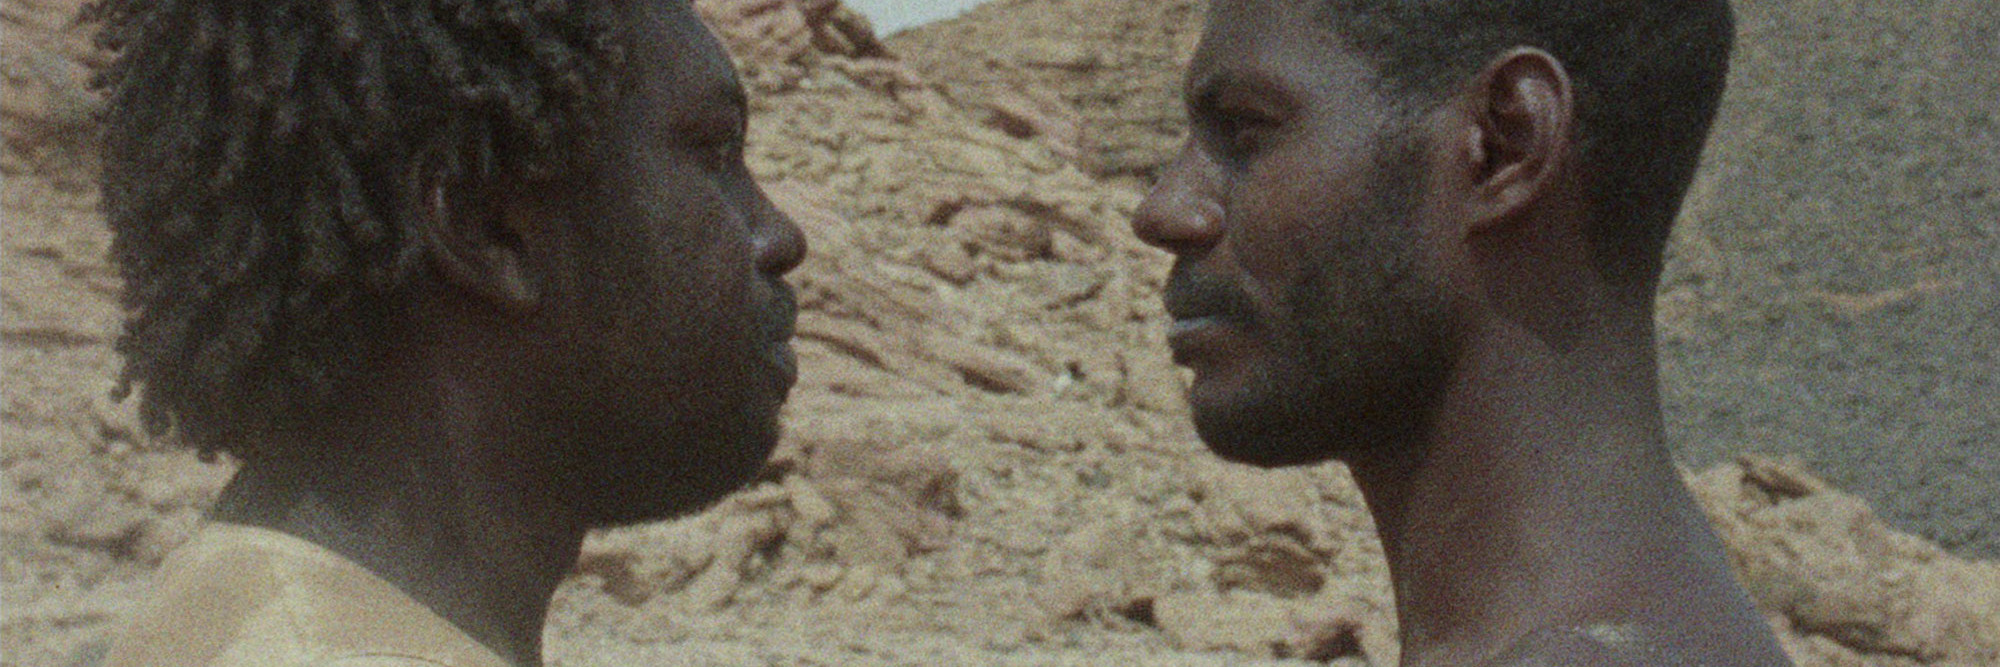 Al Habil (The Rope). 1985. Sudan. Written and directed by Ibrahim Shaddad. Courtesy Arsenal Berlin